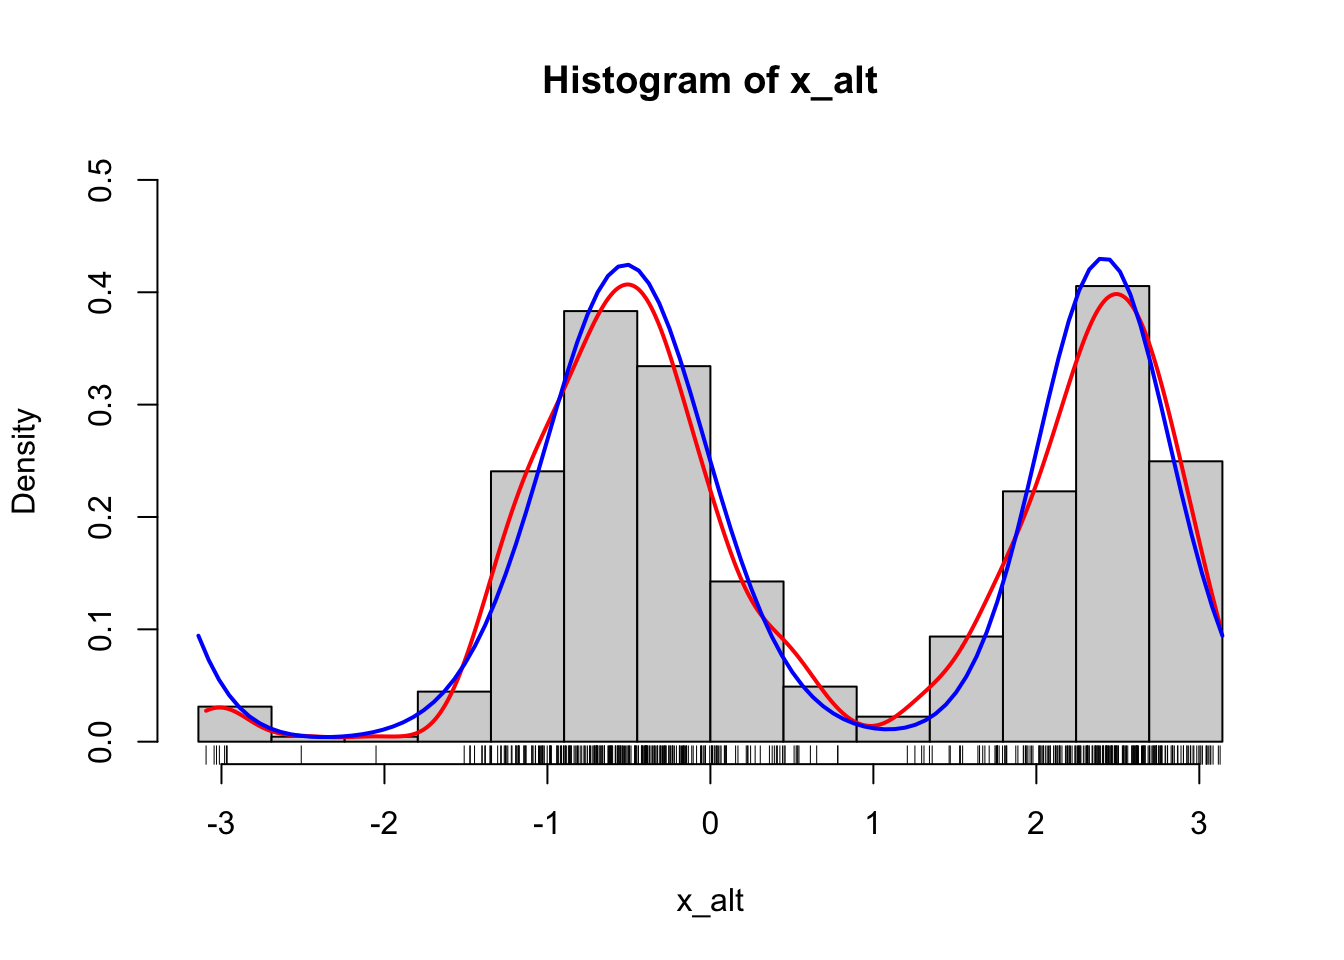 Histograms of 500 simulated data points from a mixture of two von Mises distributions using either the explicit construction of the mixture (left) or the functionality in rmovMF to simulate mixtures directly (right). A smoothed density estimate (red) and the true density (blue) are added to the plot.